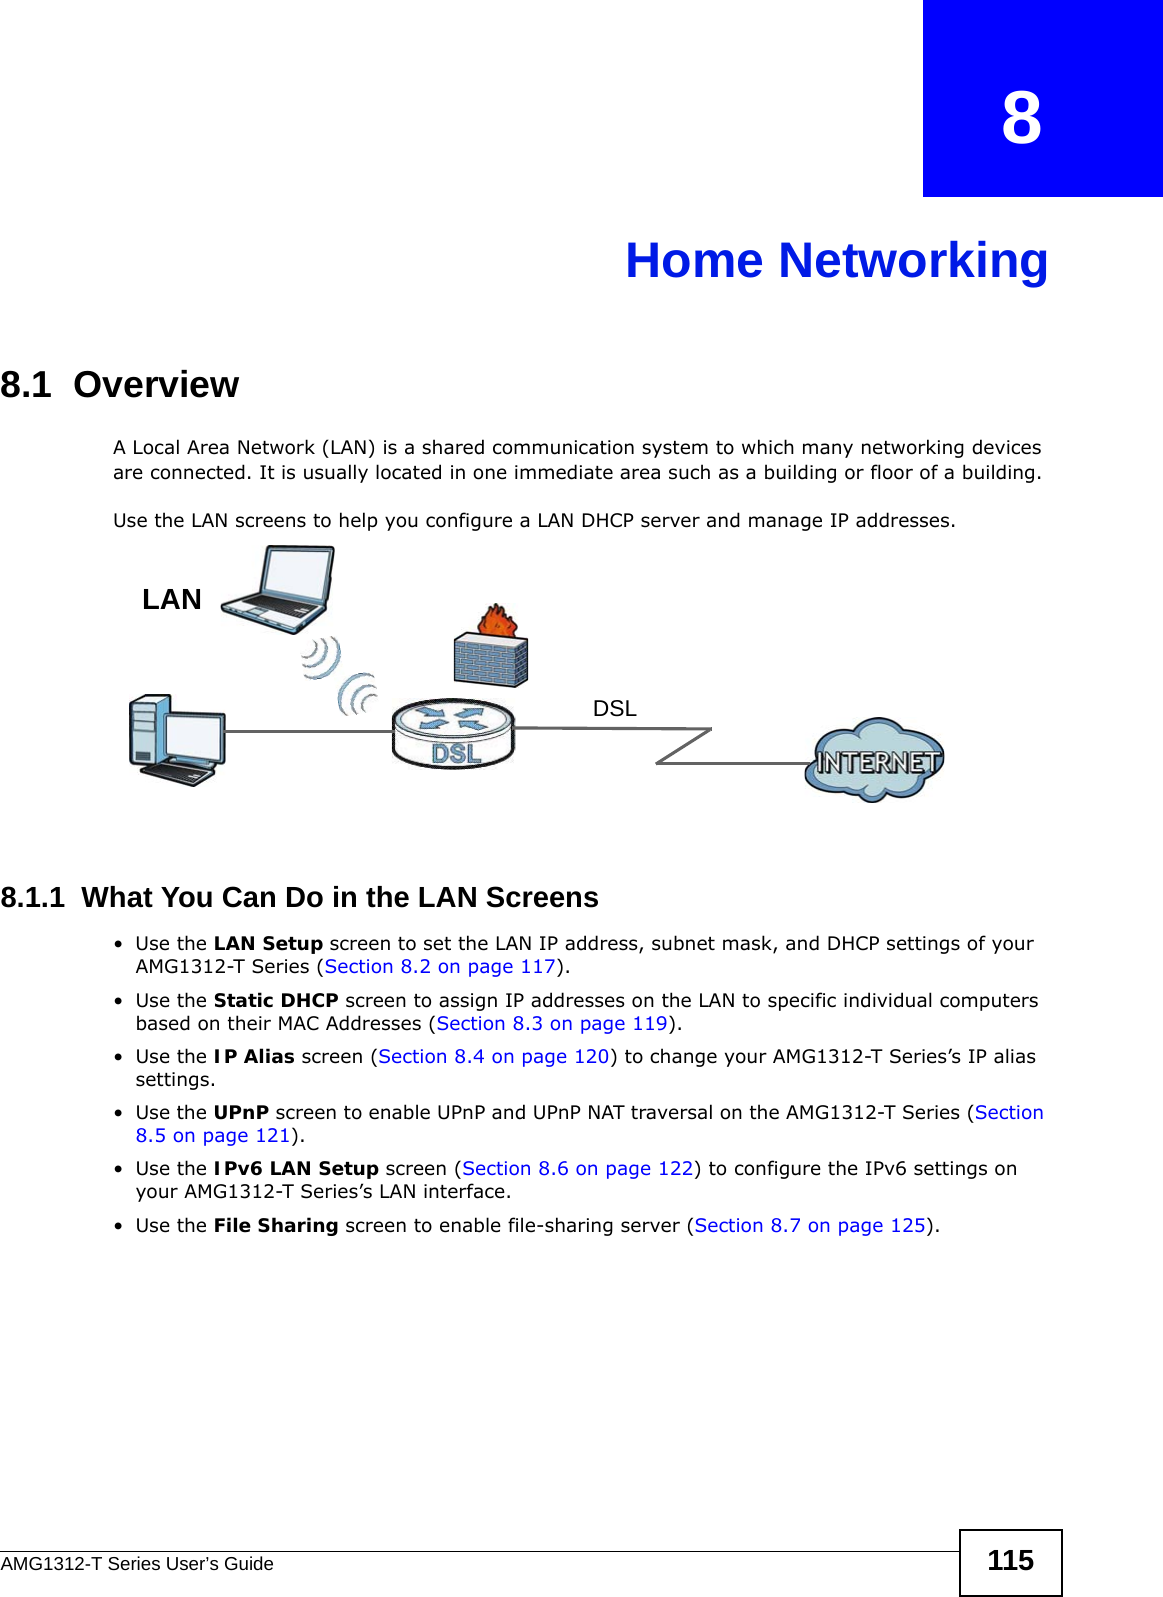 AMG1312-T Series User’s Guide 115CHAPTER   8Home Networking8.1  OverviewA Local Area Network (LAN) is a shared communication system to which many networking devices are connected. It is usually located in one immediate area such as a building or floor of a building.Use the LAN screens to help you configure a LAN DHCP server and manage IP addresses.8.1.1  What You Can Do in the LAN Screens•Use the LAN Setup screen to set the LAN IP address, subnet mask, and DHCP settings of your AMG1312-T Series (Section 8.2 on page 117).•Use the Static DHCP screen to assign IP addresses on the LAN to specific individual computers based on their MAC Addresses (Section 8.3 on page 119). •Use the IP Alias screen (Section 8.4 on page 120) to change your AMG1312-T Series’s IP alias settings.•Use the UPnP screen to enable UPnP and UPnP NAT traversal on the AMG1312-T Series (Section 8.5 on page 121).•Use the IPv6 LAN Setup screen (Section 8.6 on page 122) to configure the IPv6 settings on your AMG1312-T Series’s LAN interface.•Use the File Sharing screen to enable file-sharing server (Section 8.7 on page 125). DSLLAN